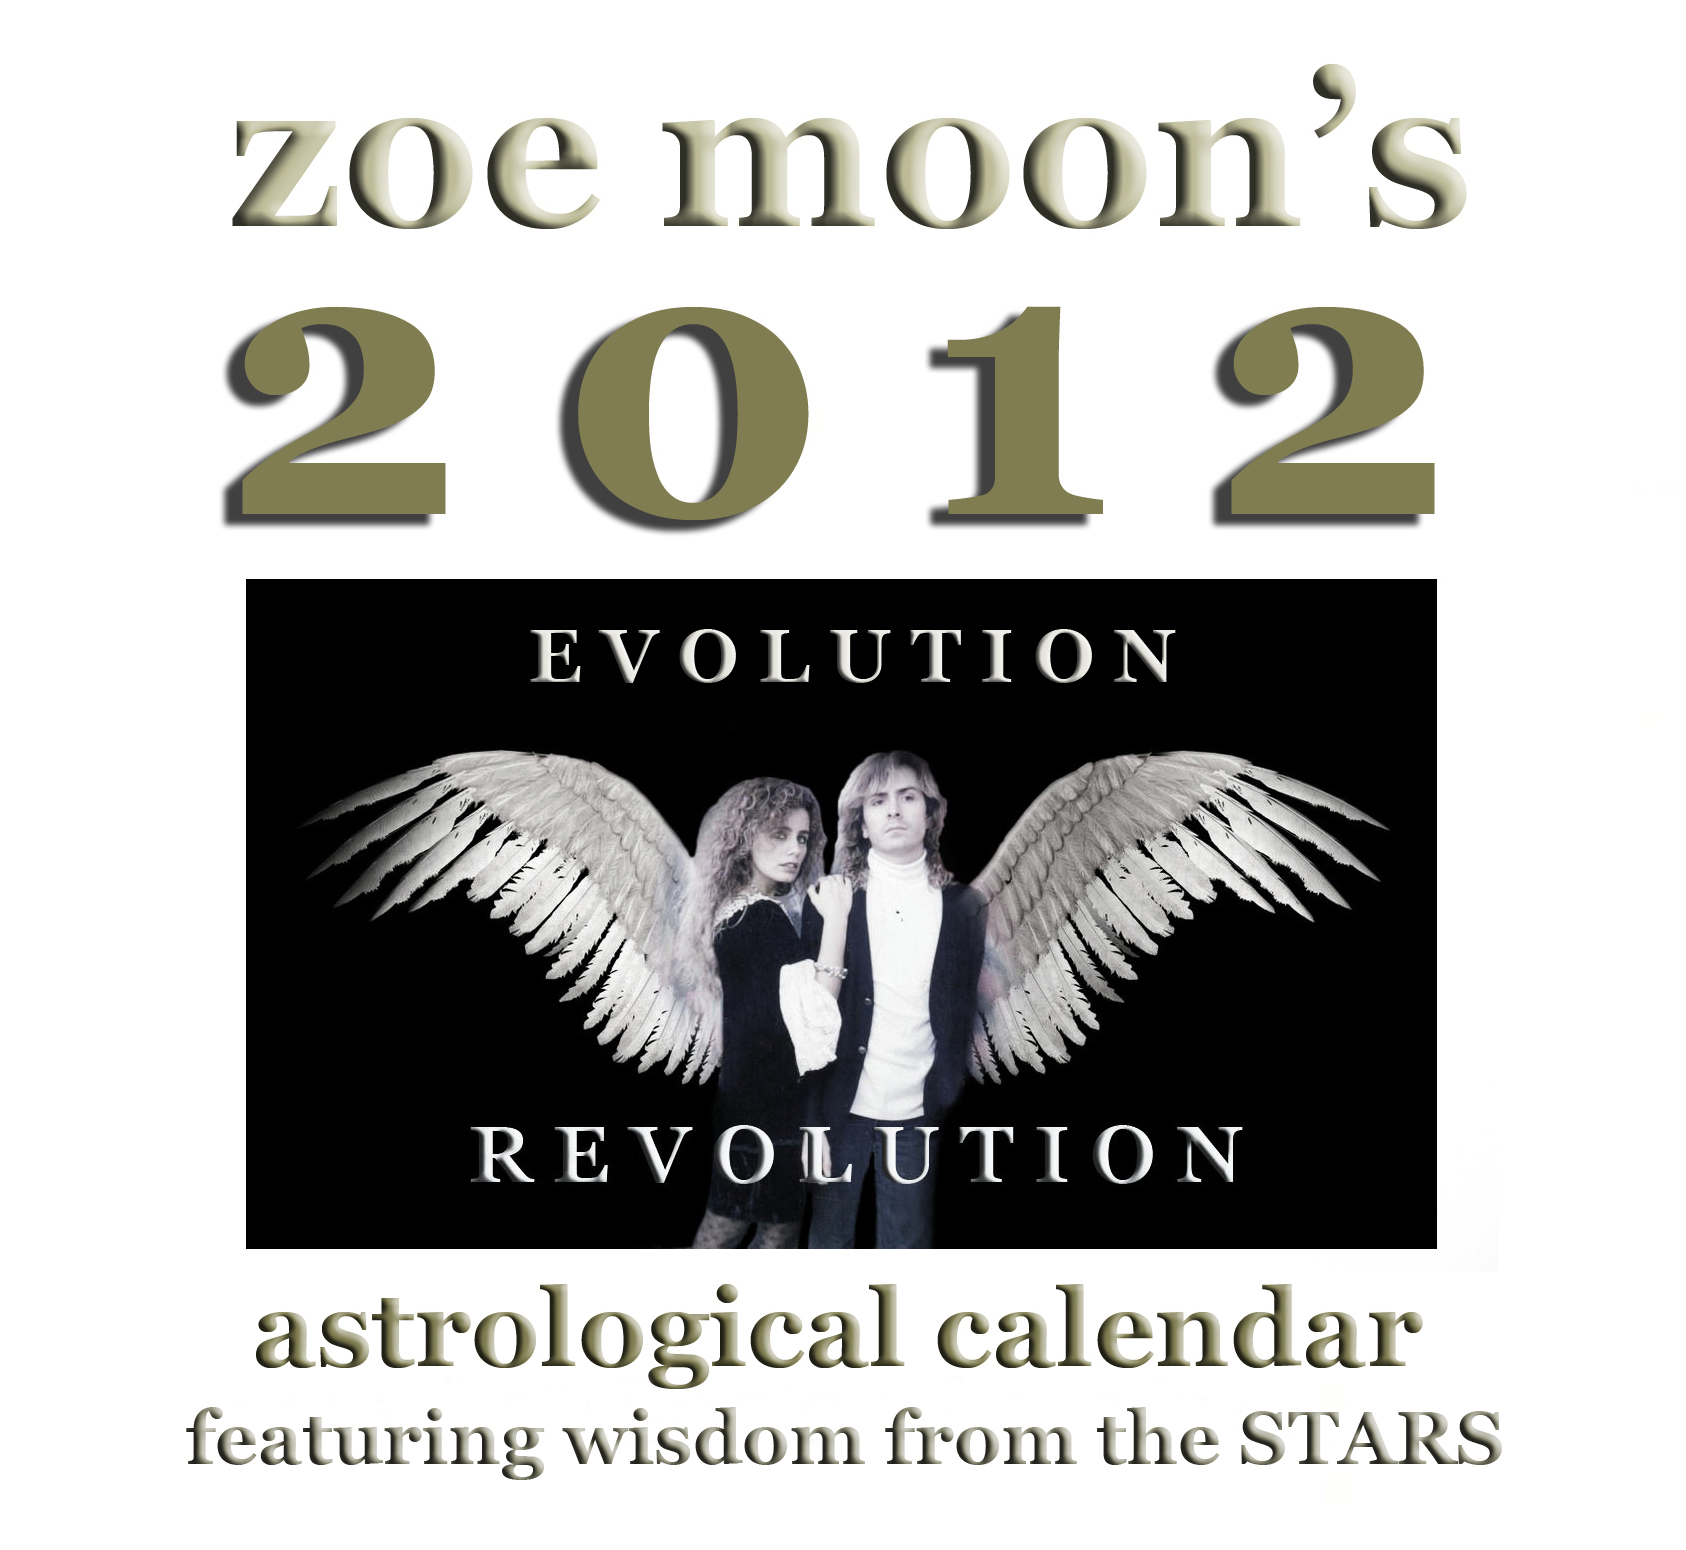 2012 Calendar available at http://astrologyscopes.com